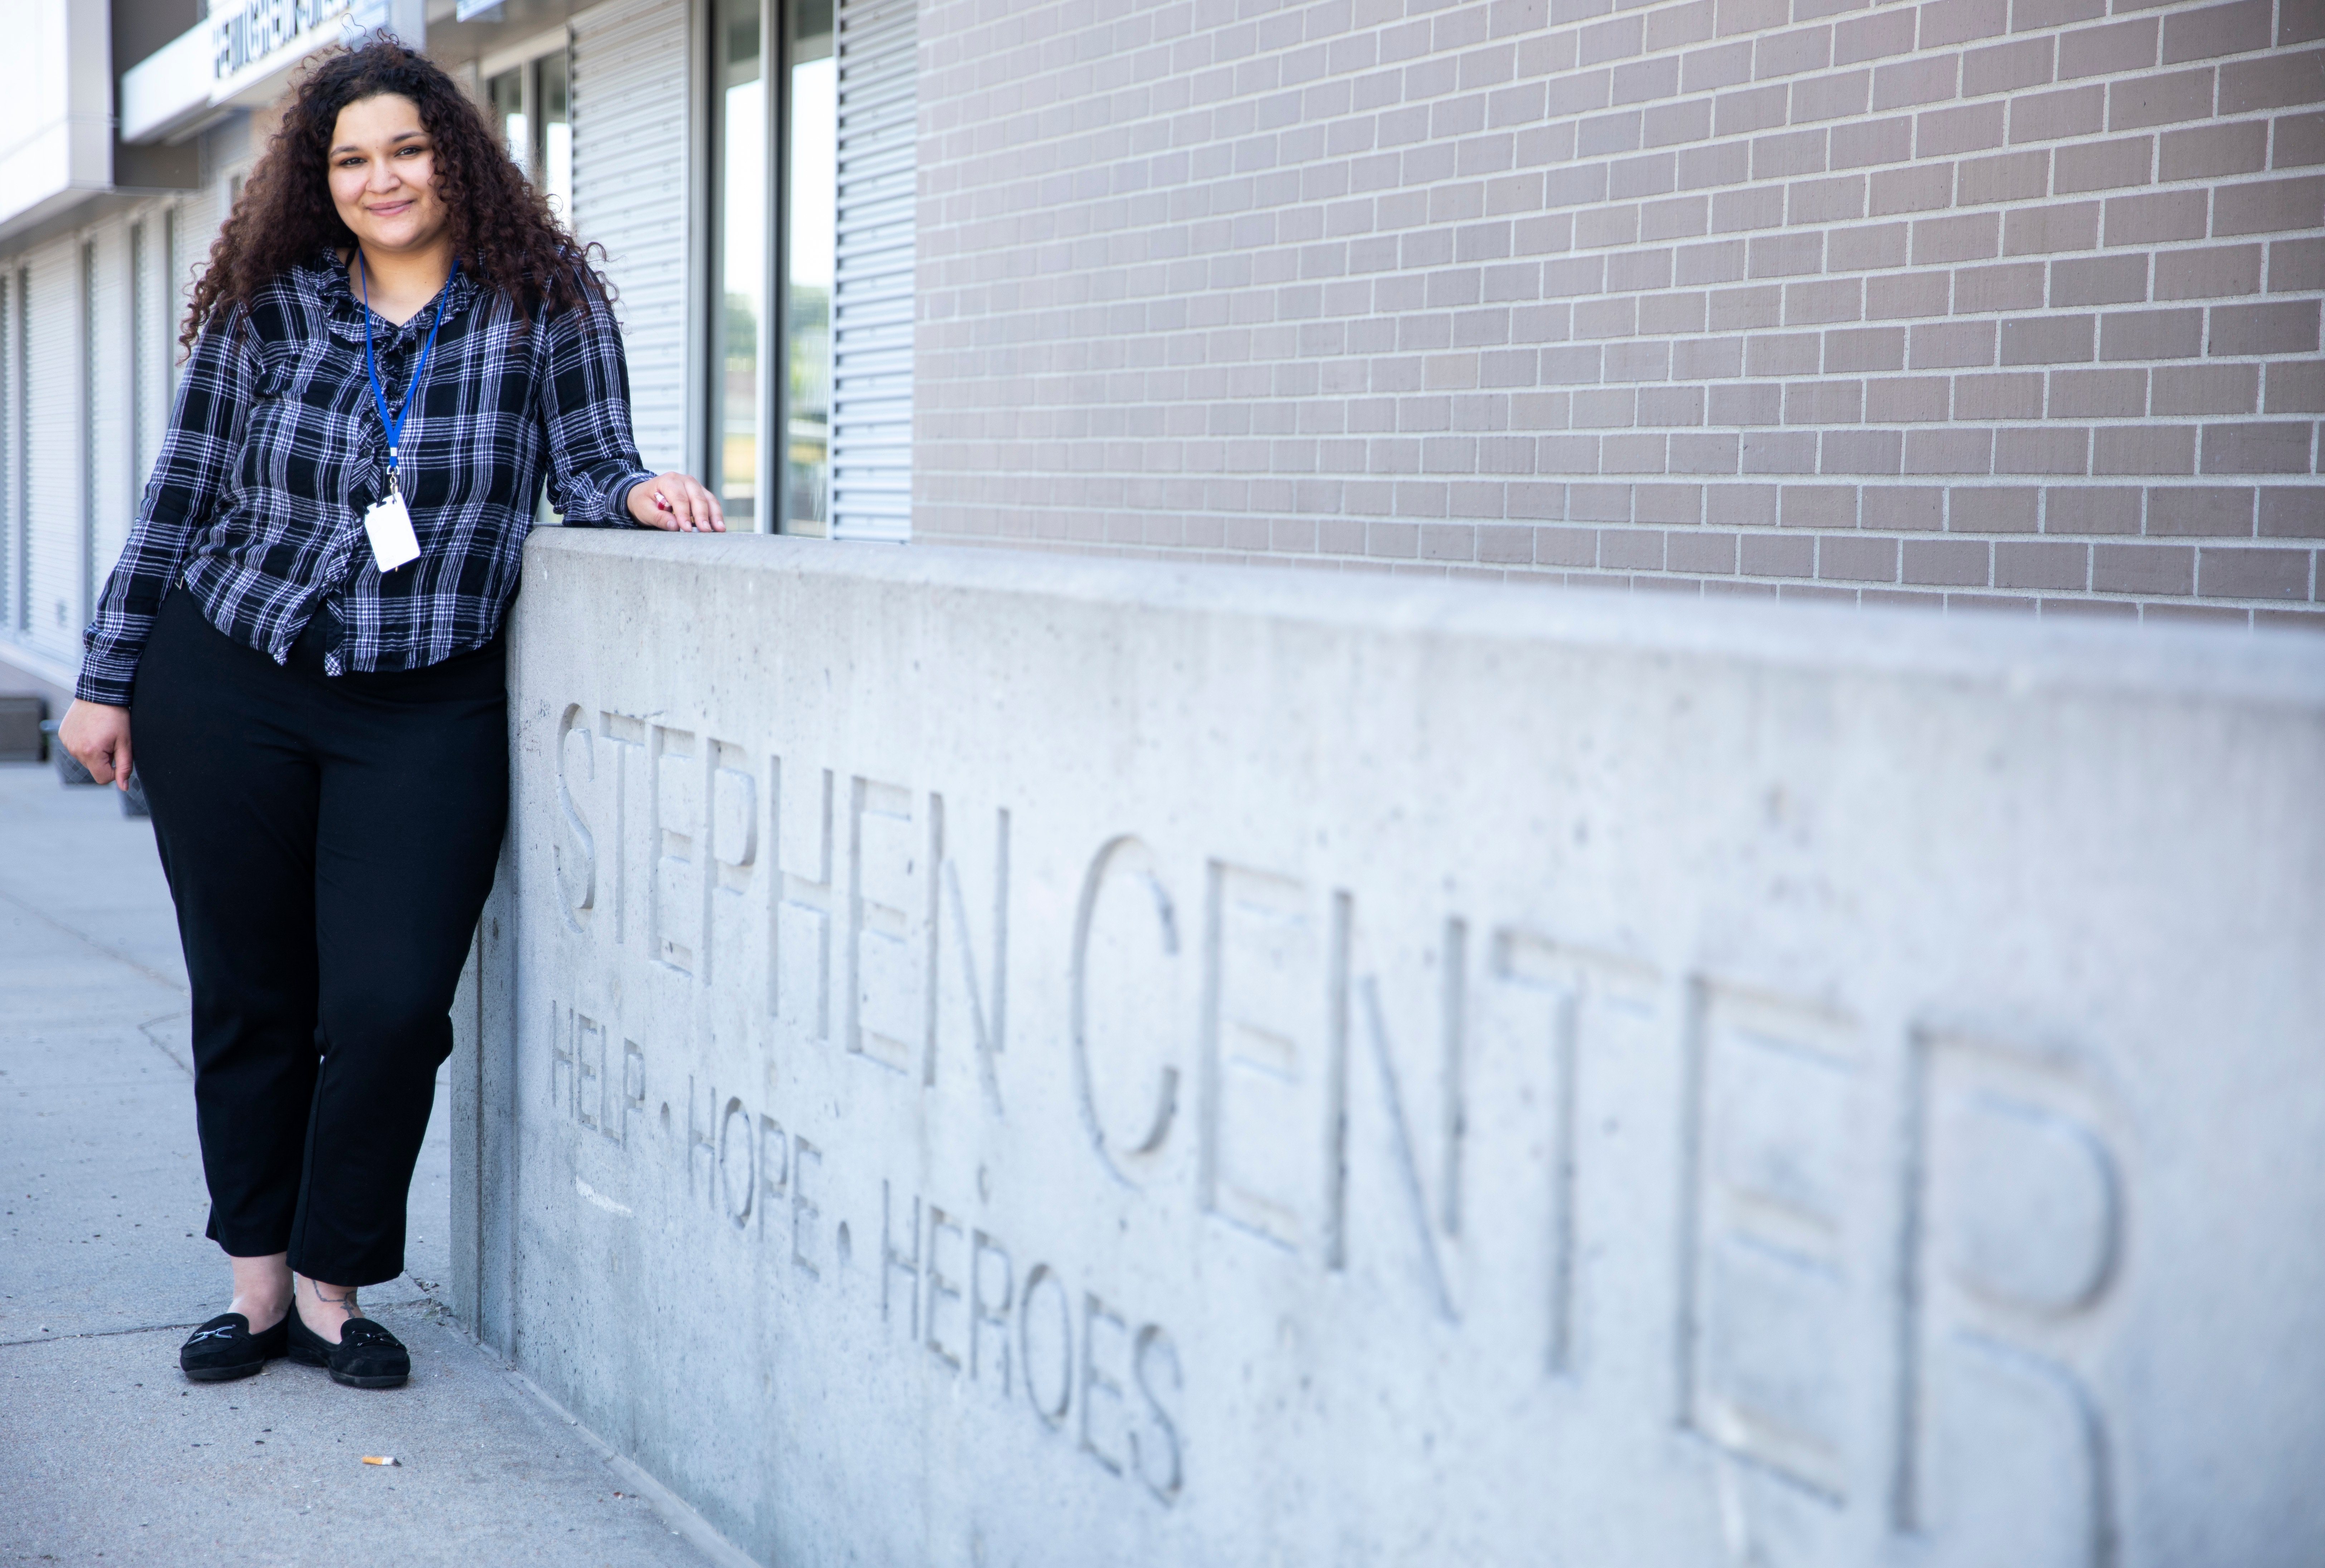 Photo of Mariyah Jackson in front of the Steven Center sign.